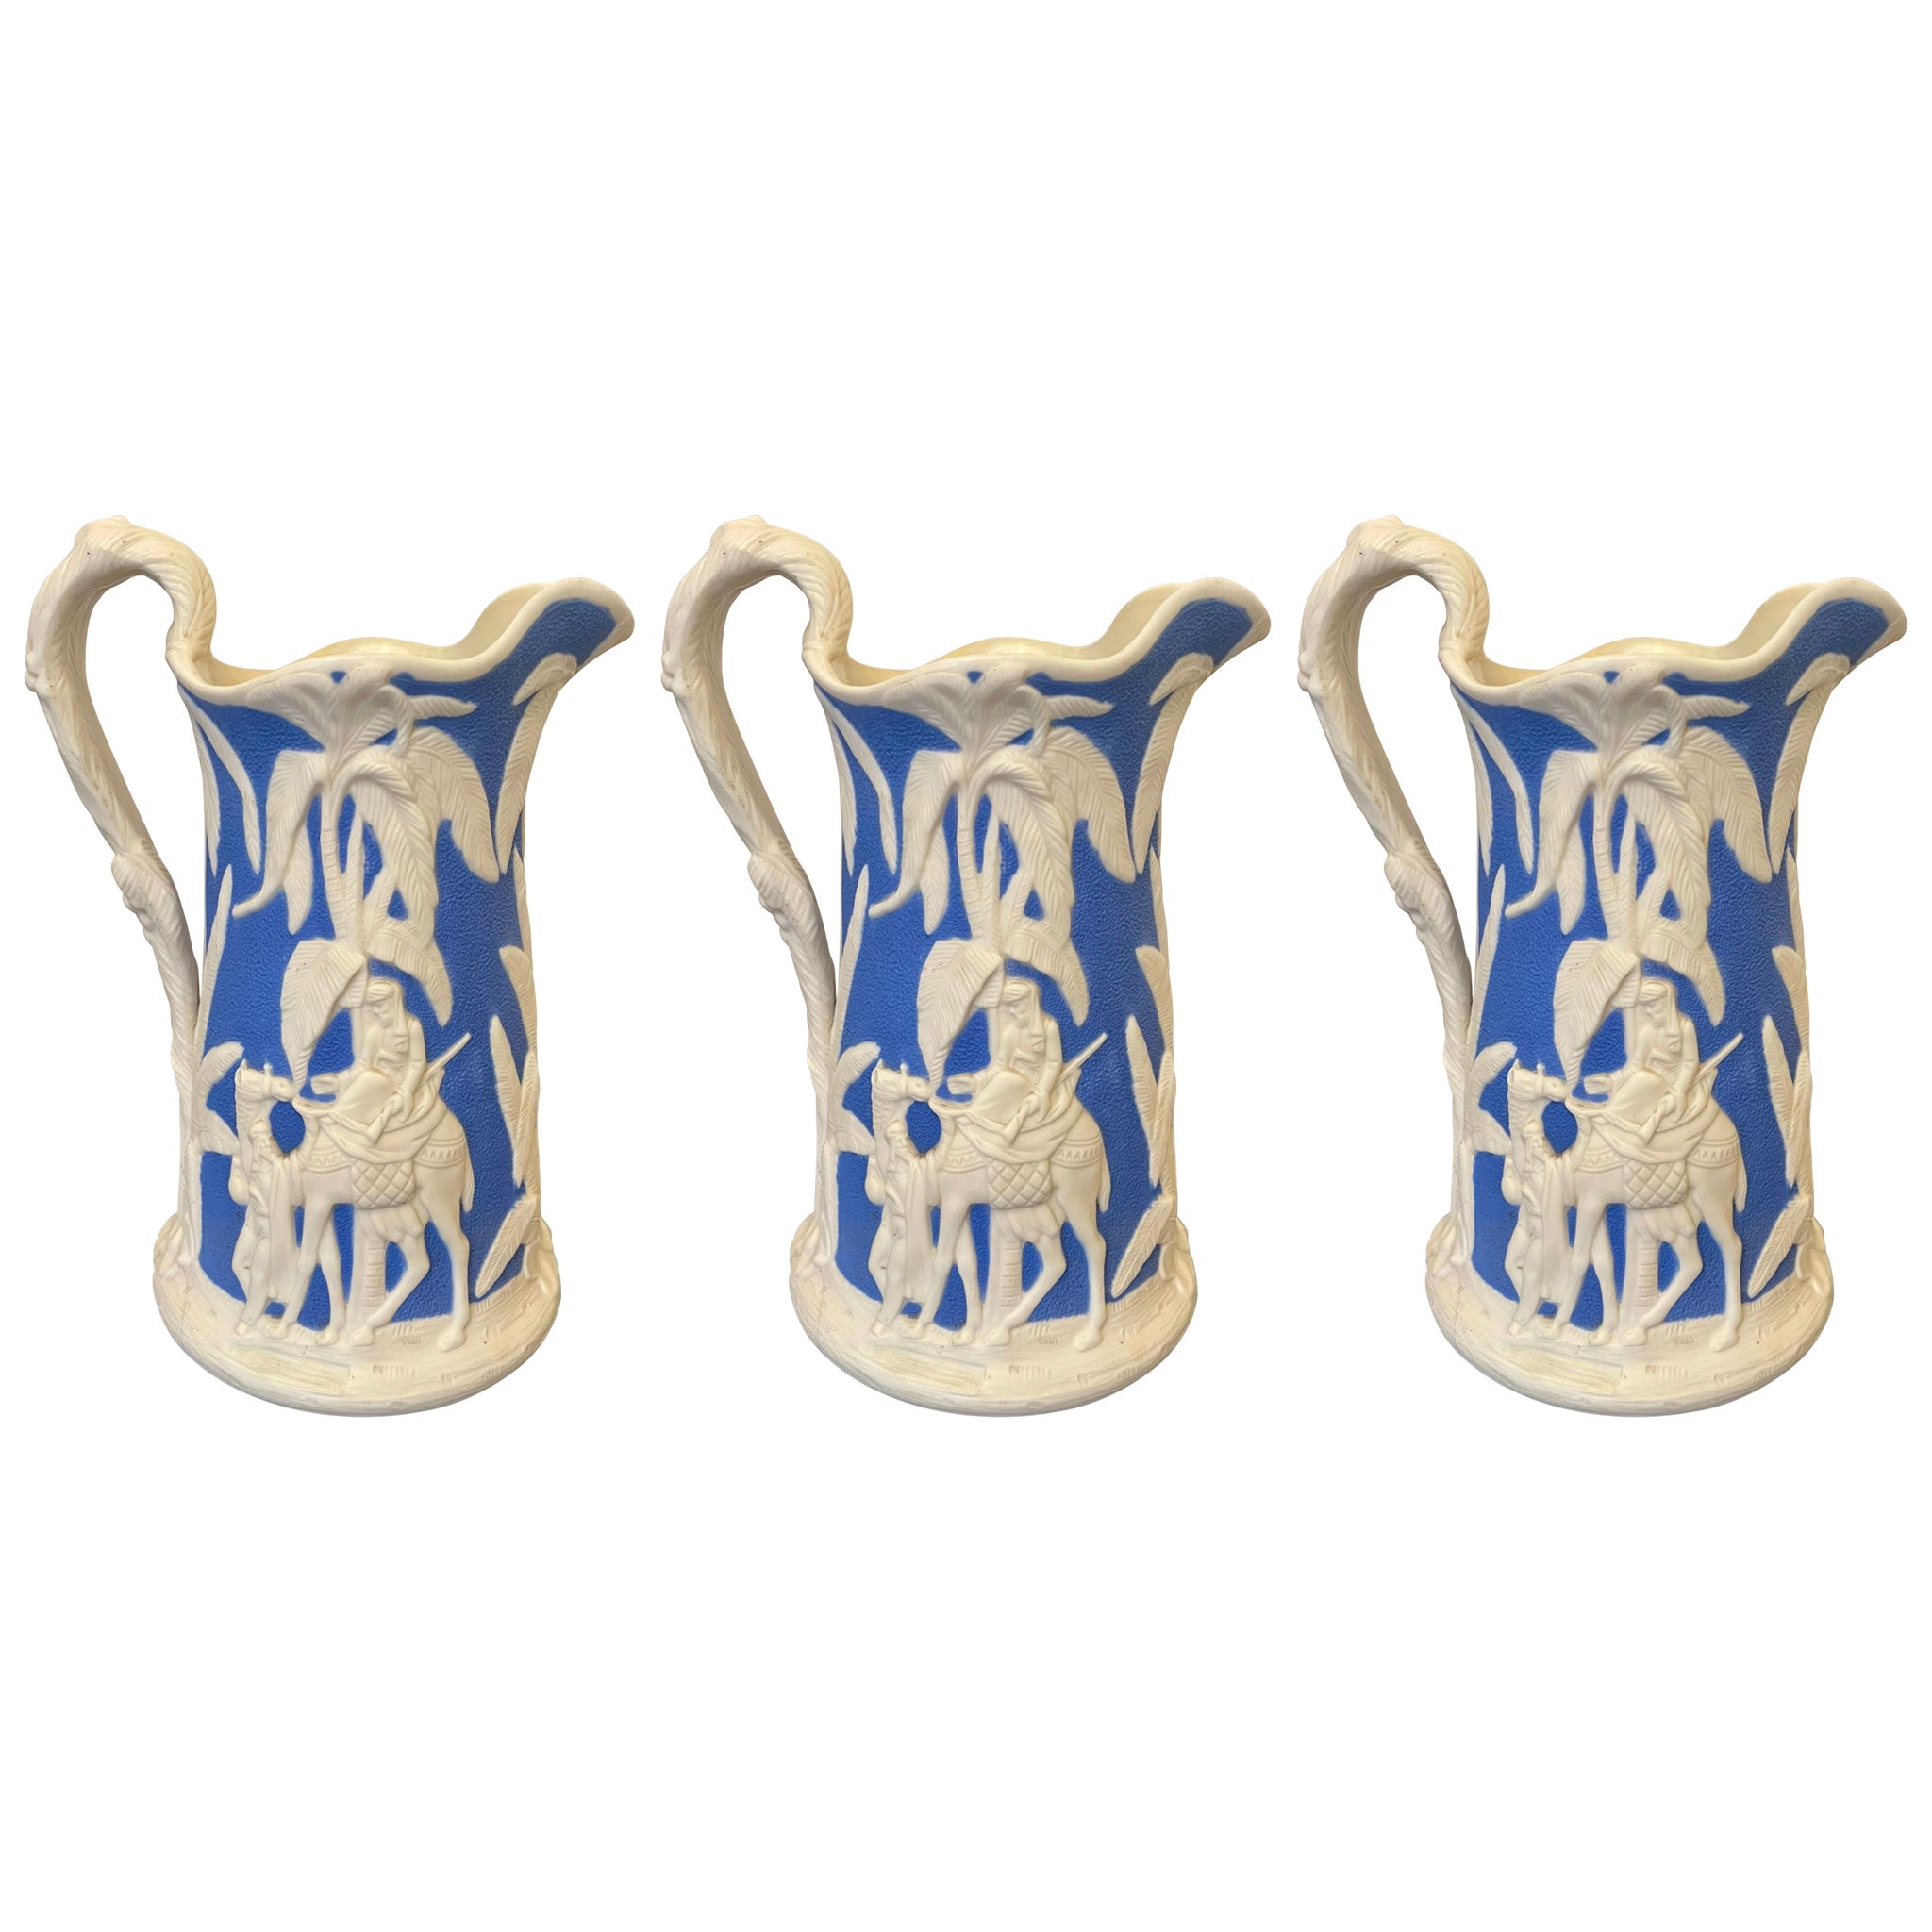 Set of Three Antique Victorian Blue and White Jugs by Samuel Alcock